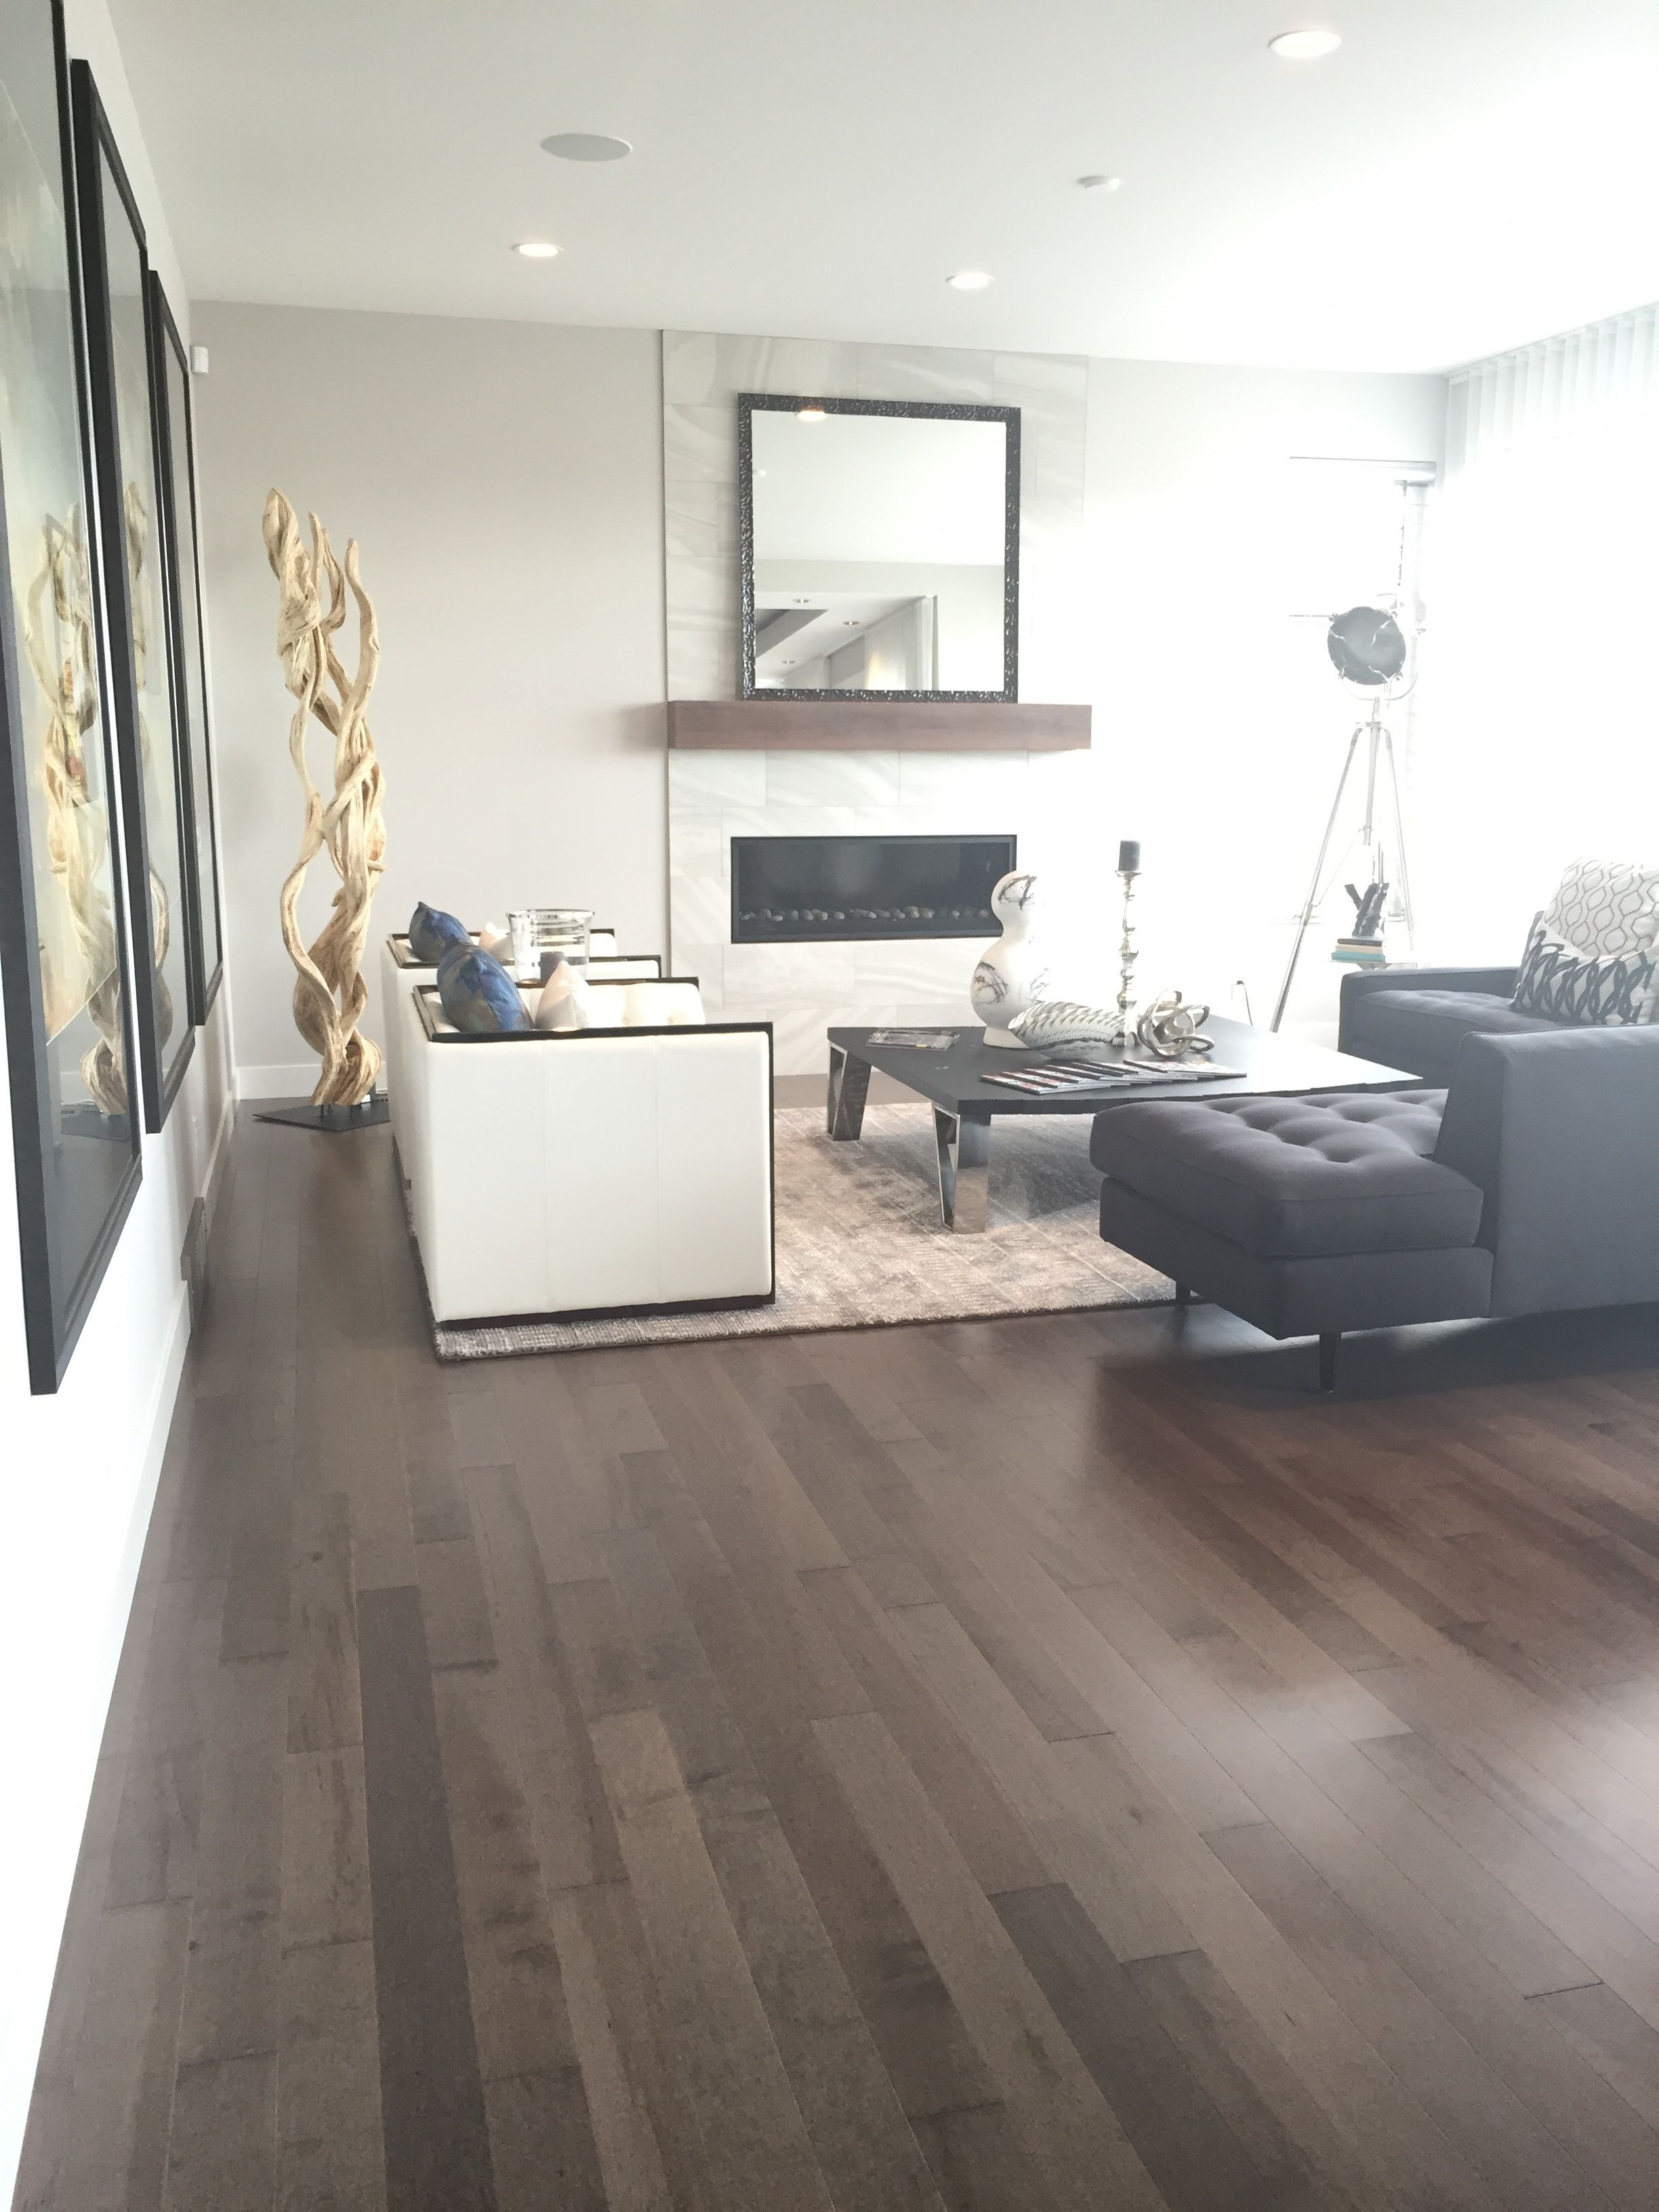 hardwood flooring victoria park of smoky grey essential hard maple tradition lauzon hardwood inside beautiful living room from the cantata showhome featuring lauzons smokey grey hard maple hardwood flooring from the essential collection